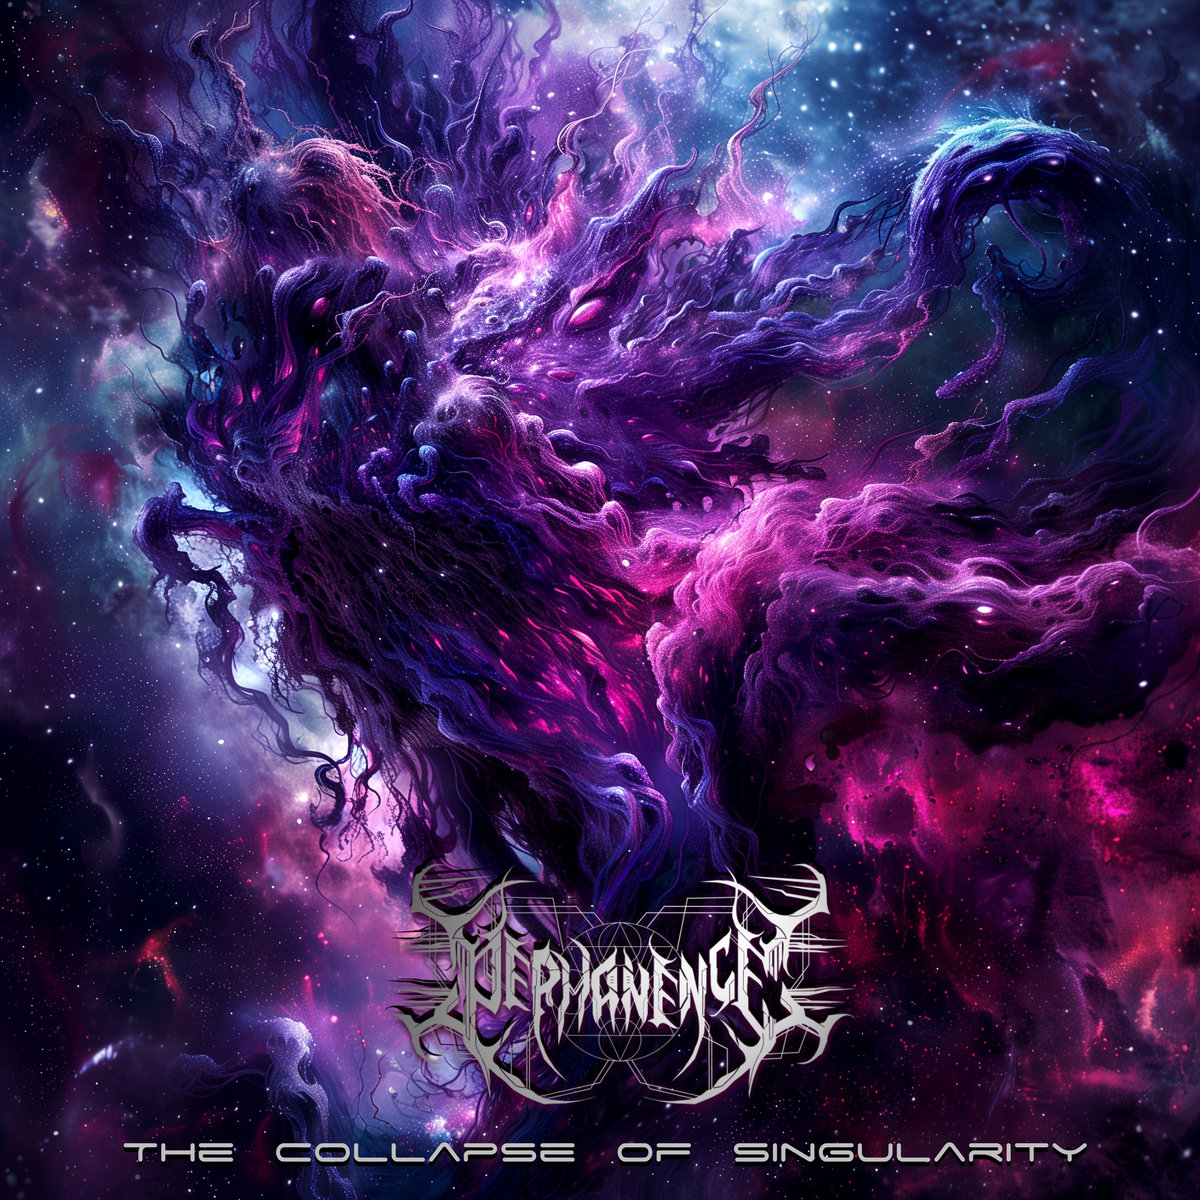 Permanence - The Collapse of Singularity (EP)
Technical/Brutal Death Metal from Venezuela
Release date: April 27th, 2024

permanenceofficial.bandcamp.com/music

#permanence #deathmetalvenezuela
#deathmetal #deathmetalband
#technicalbrutaldeathmetal #brutaldeathmetal
#extremedeathmetal…